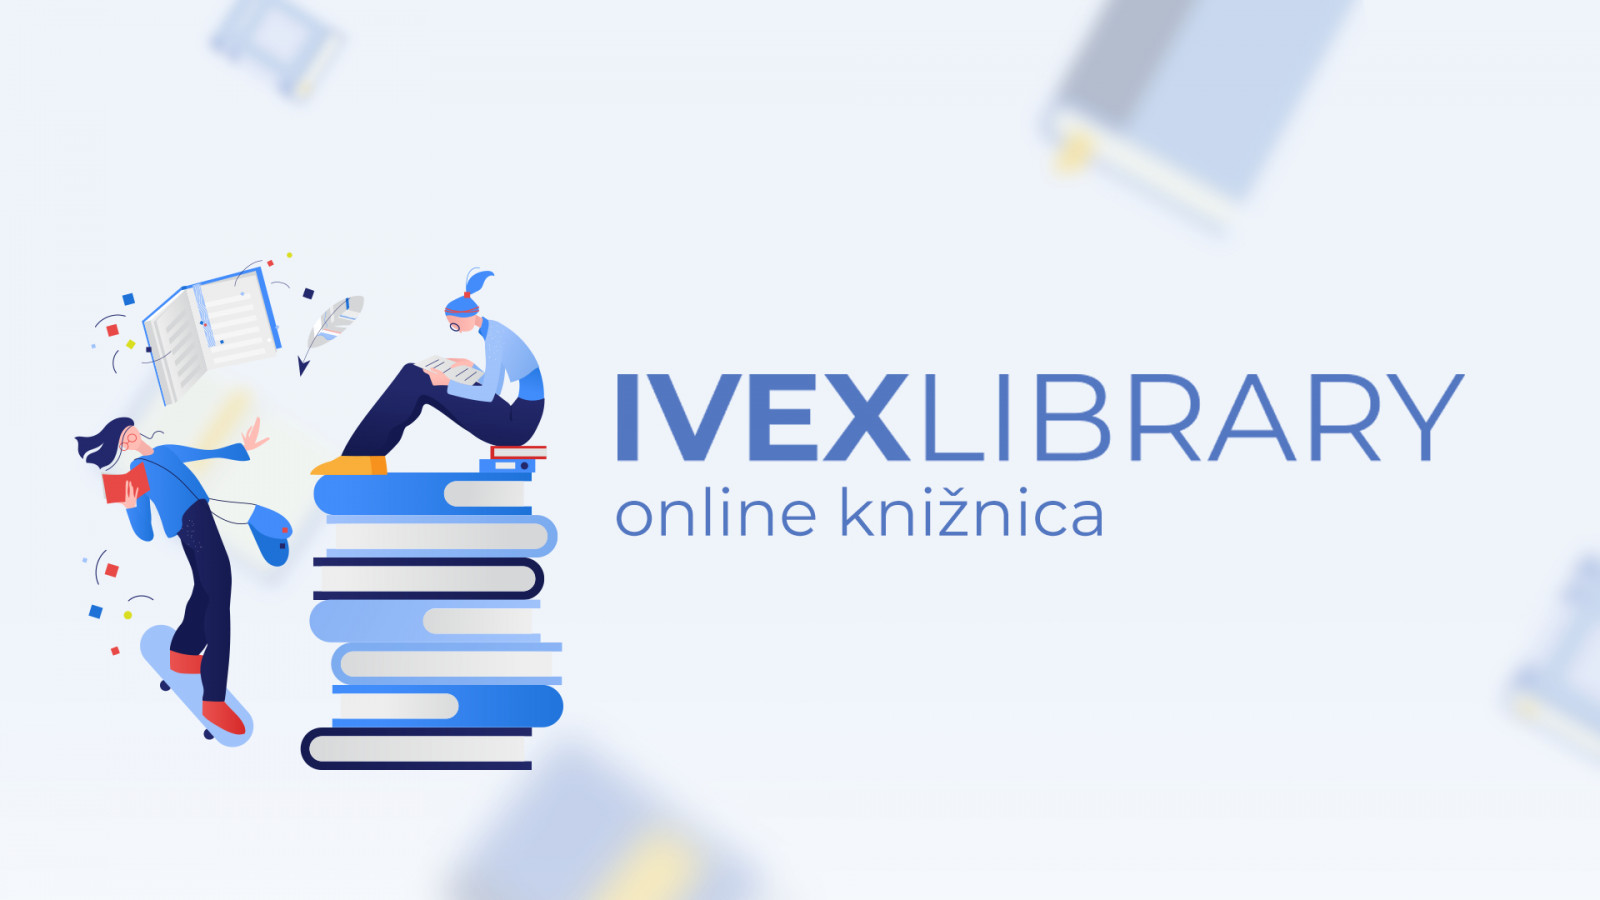 Ivex library